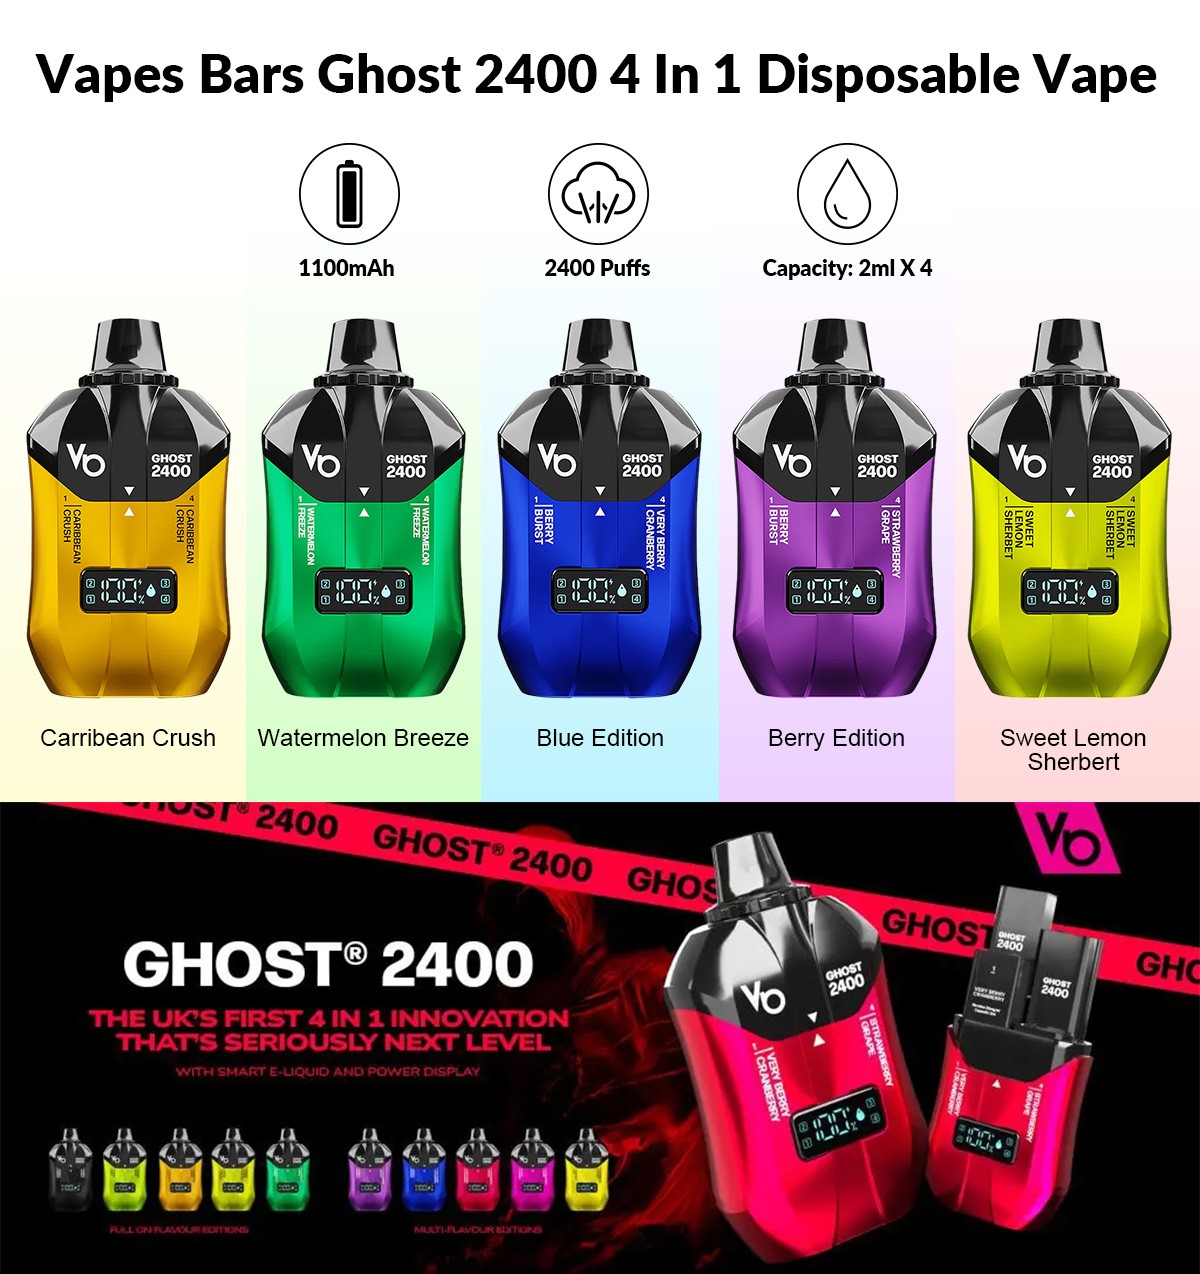 Vapes Bars Ghost 2400 4 In 1